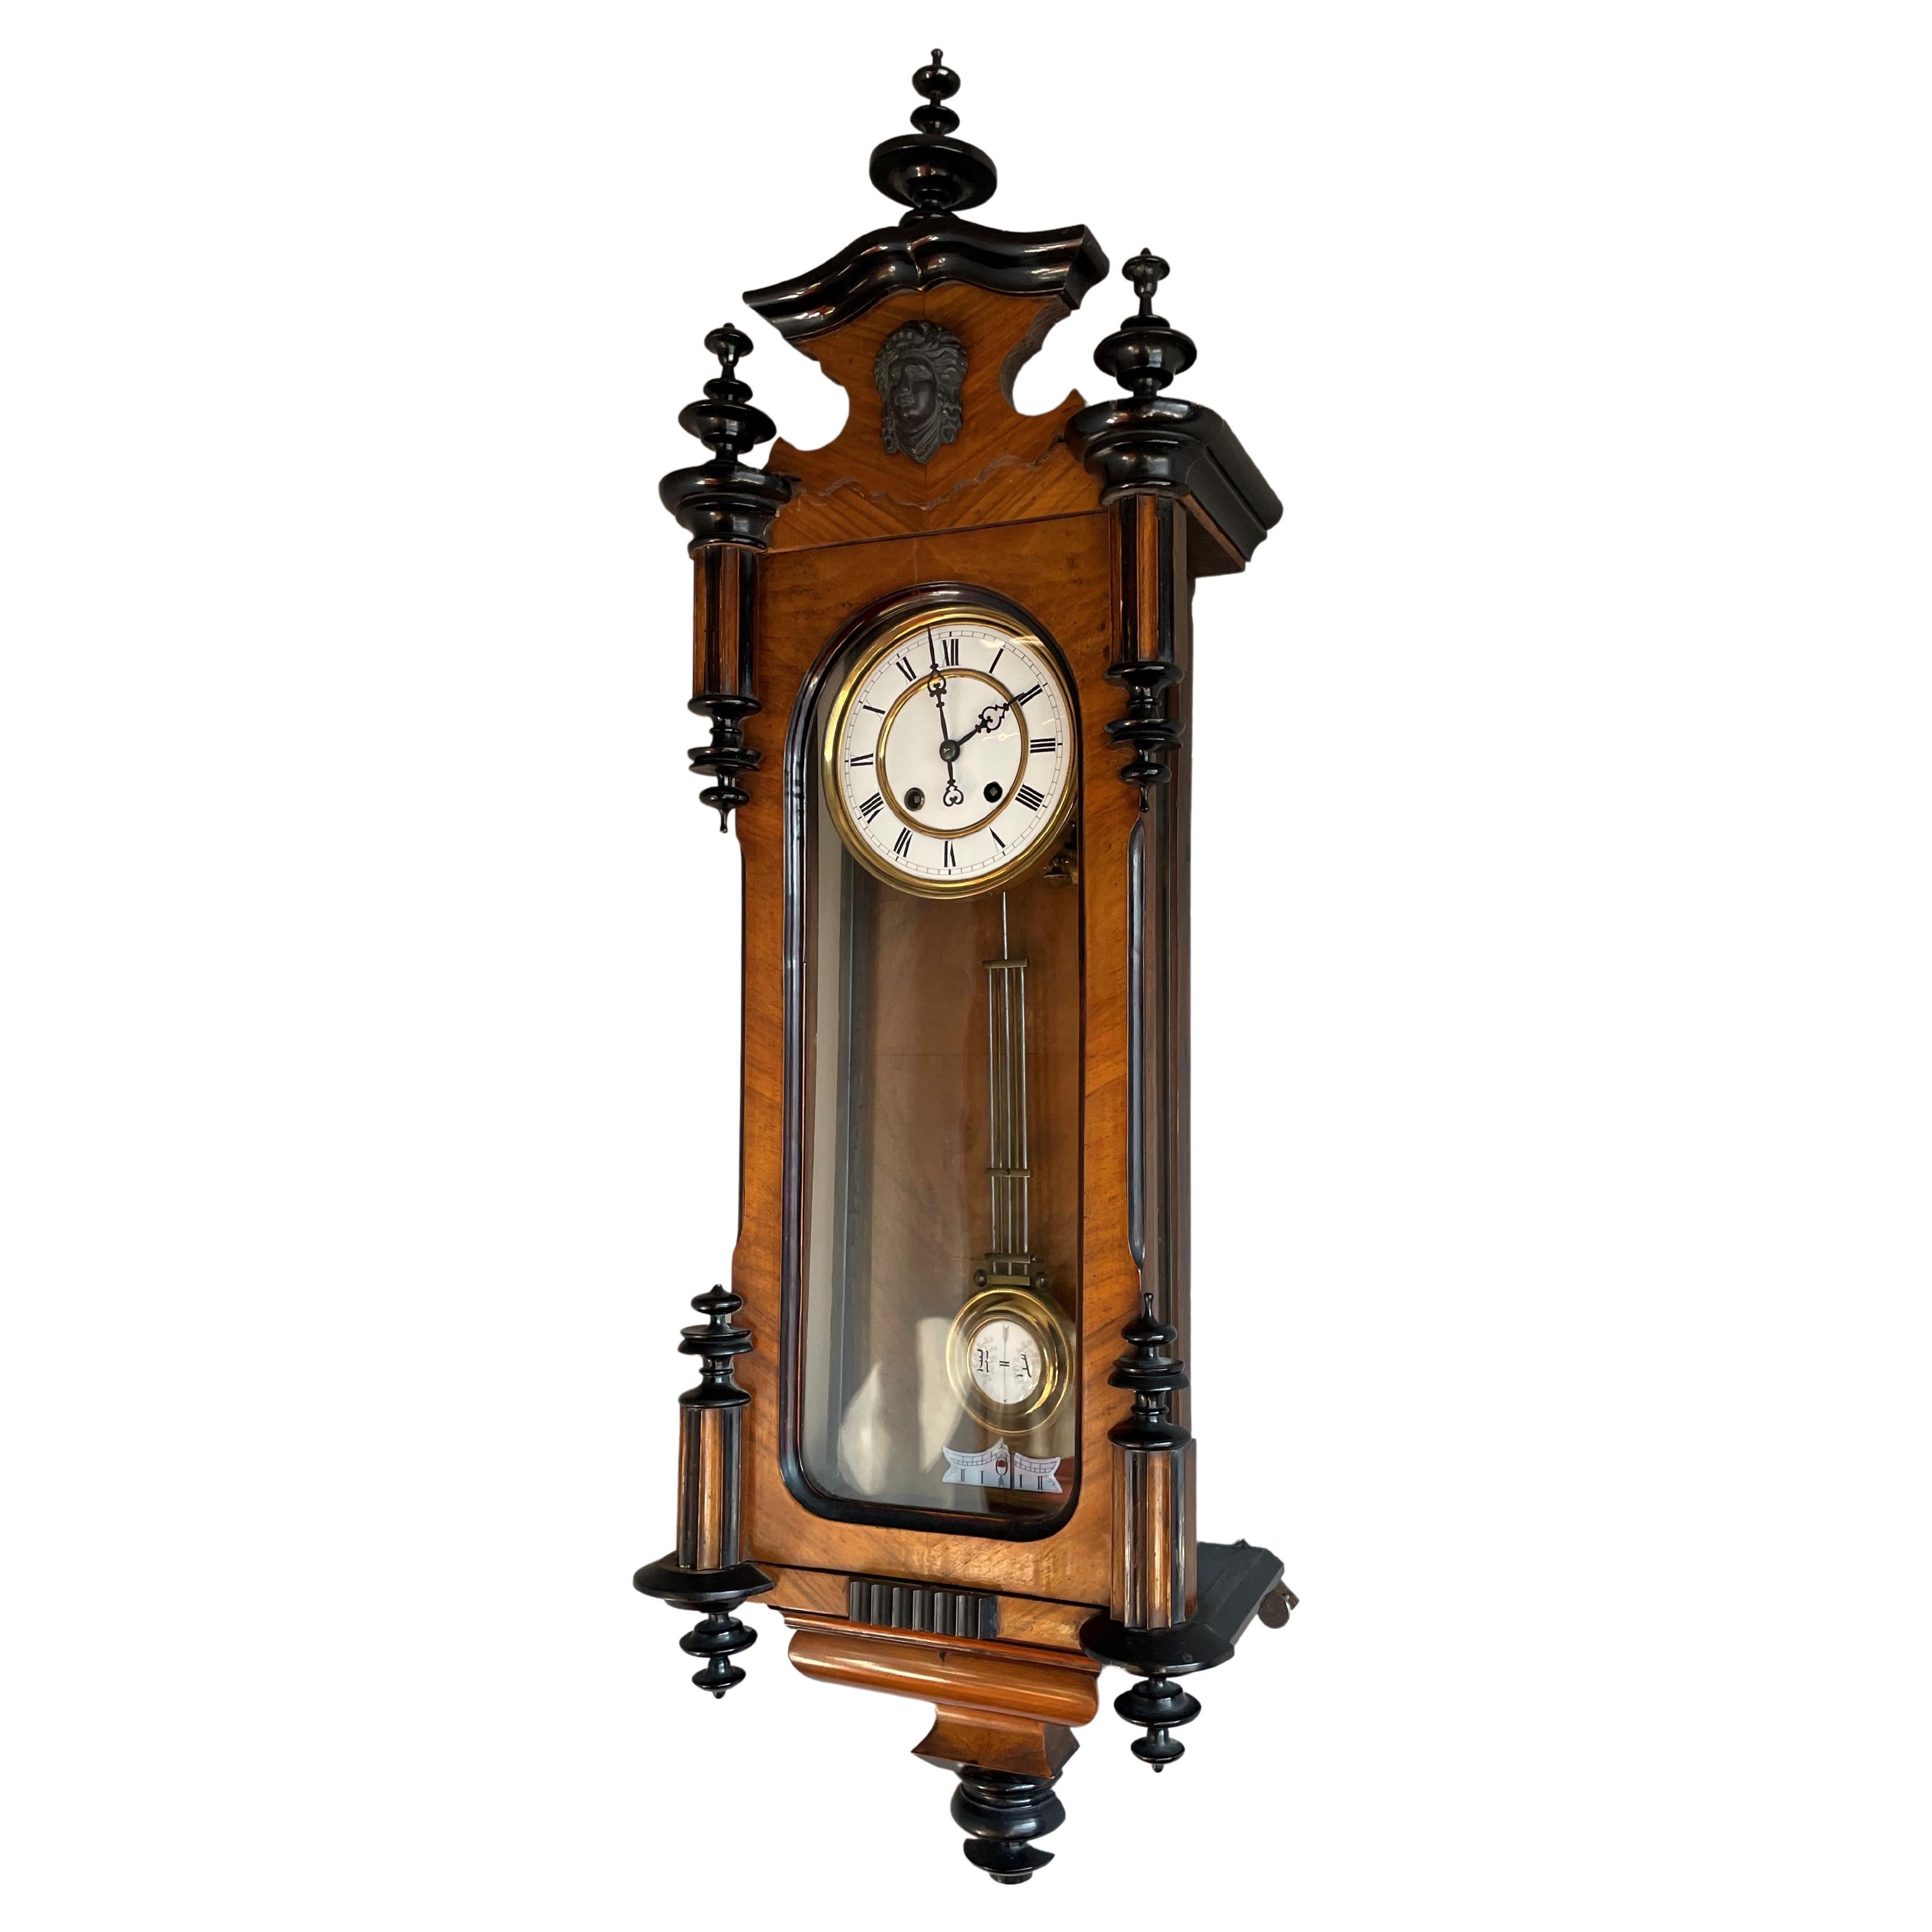 Perfect running and striking, late 1800s, partially ebonized antique wall clock.

If you are looking for a stylish and stately wall clock then this tall antique specimen could be gracing the wall of your home or office space soon. All handcrafted